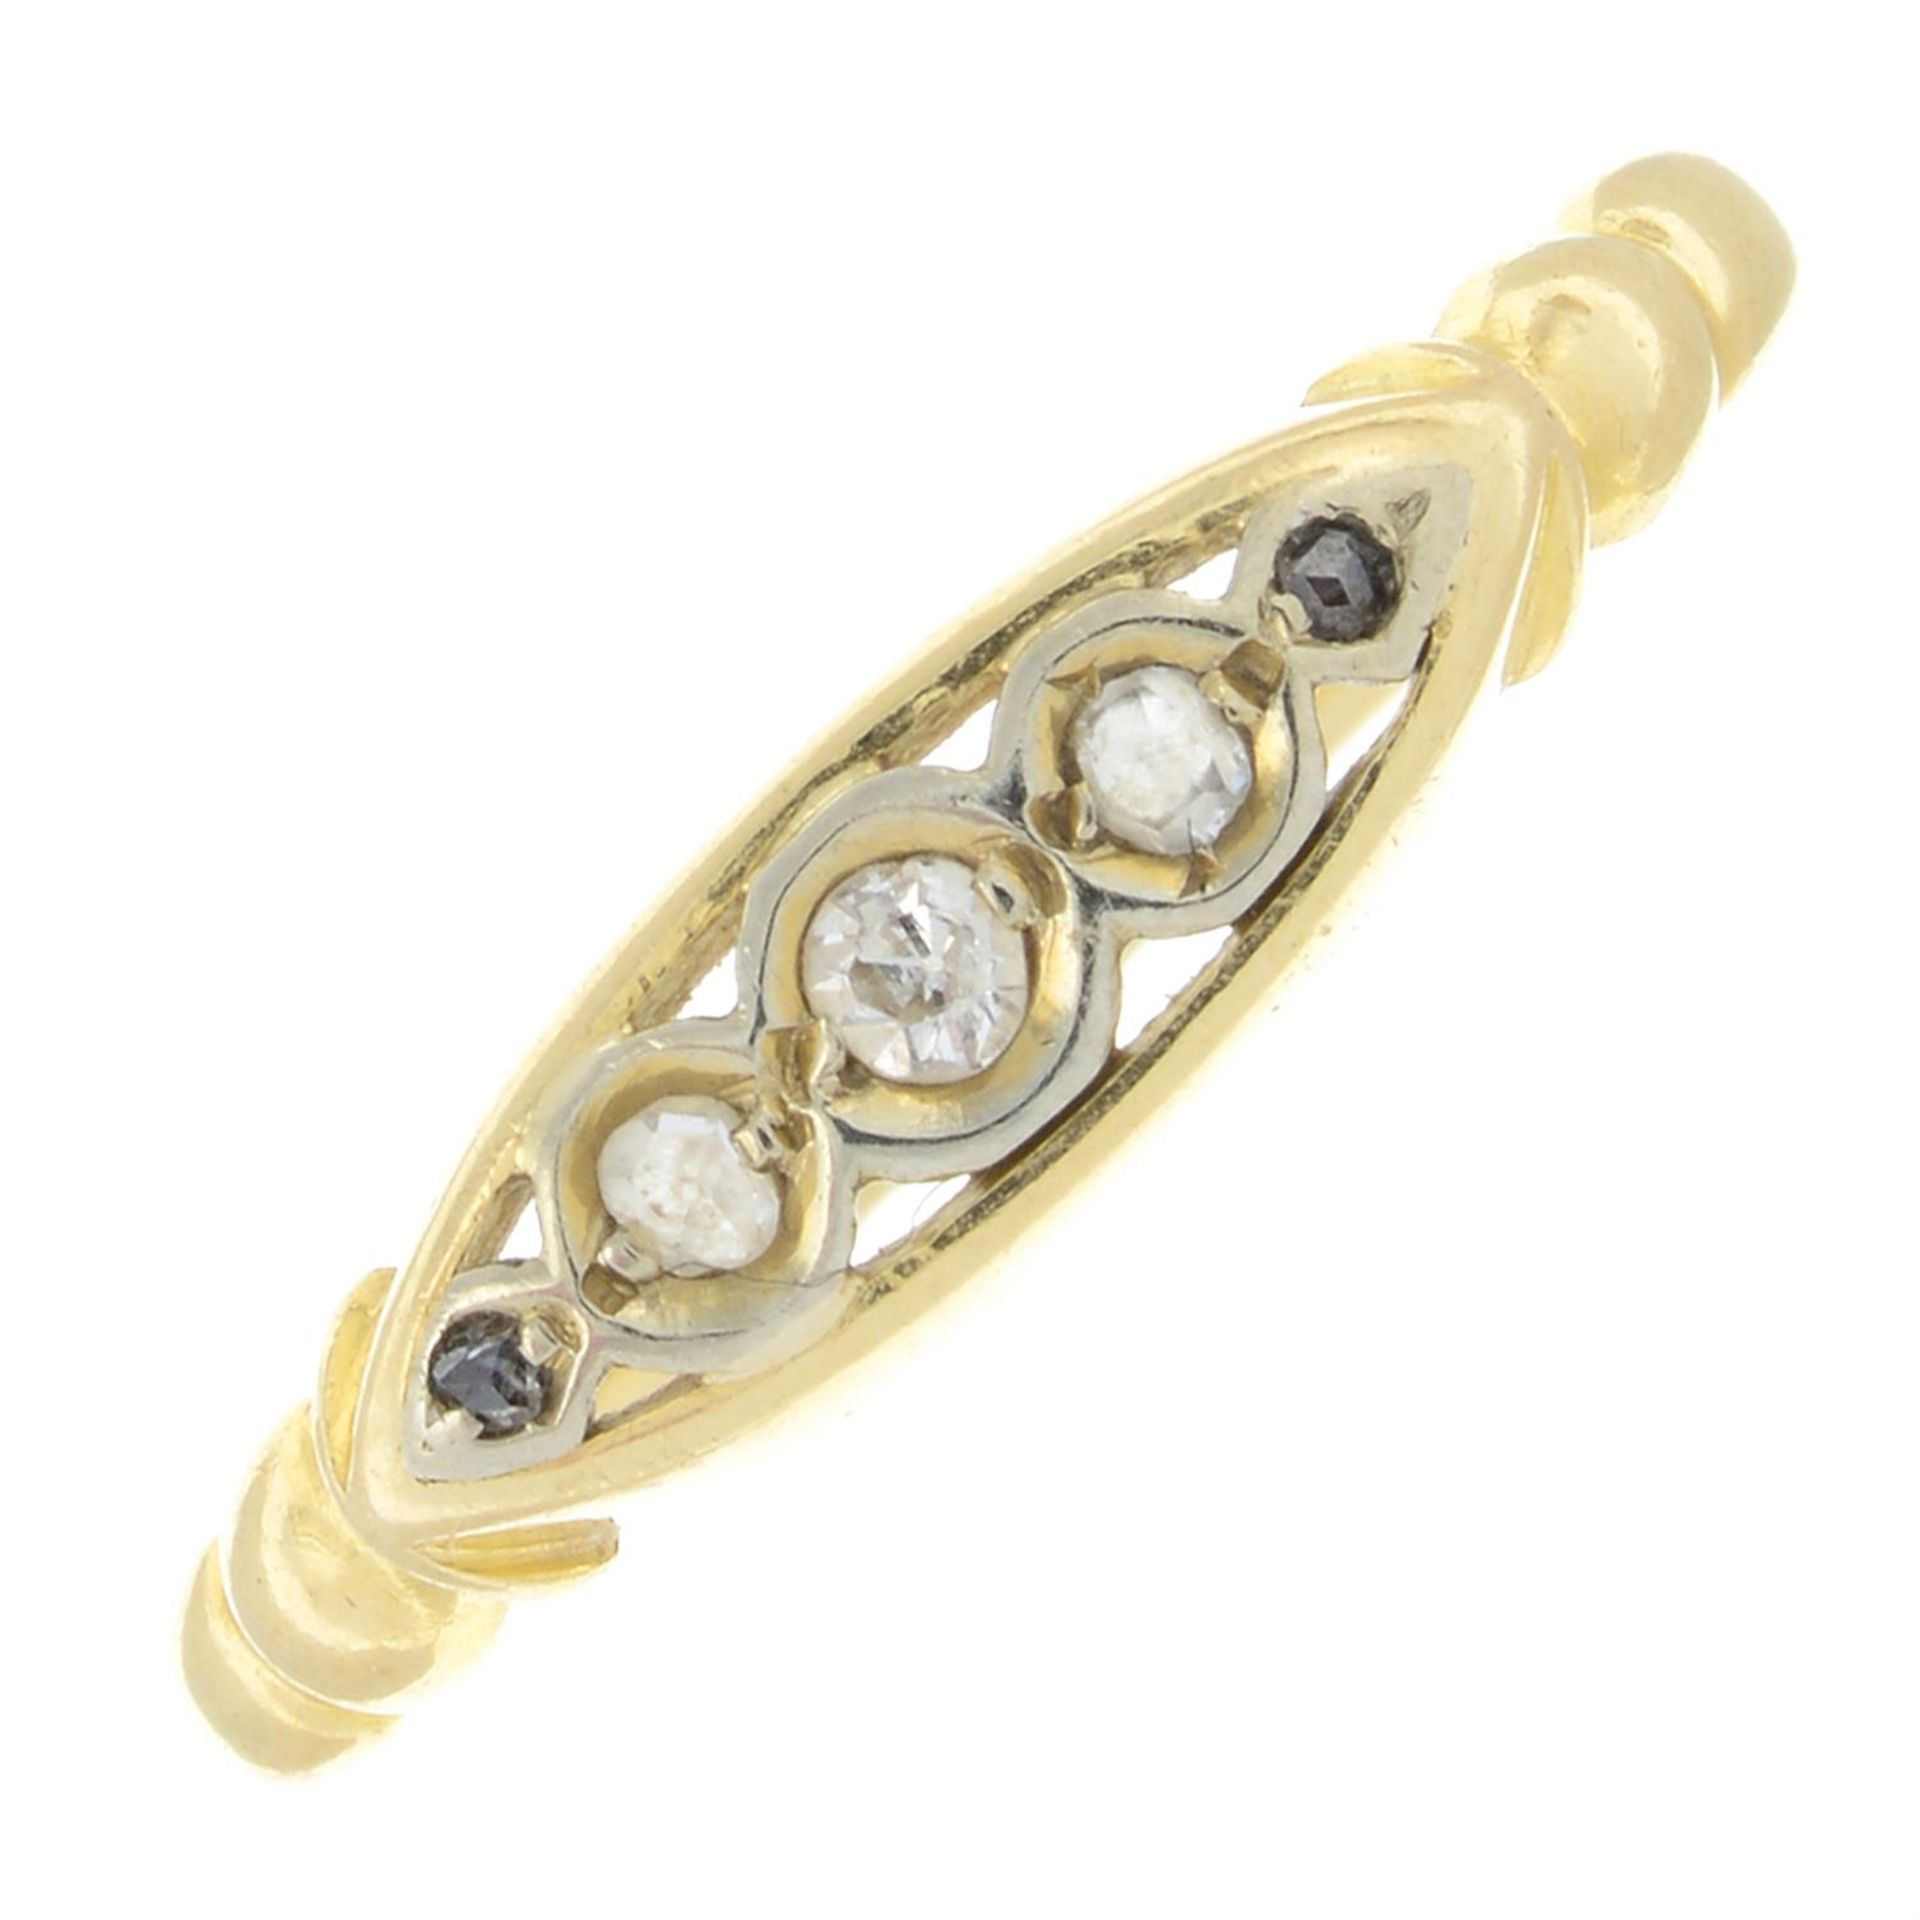 An early 20th century gold old and rose-cut diamond five-stone ring.